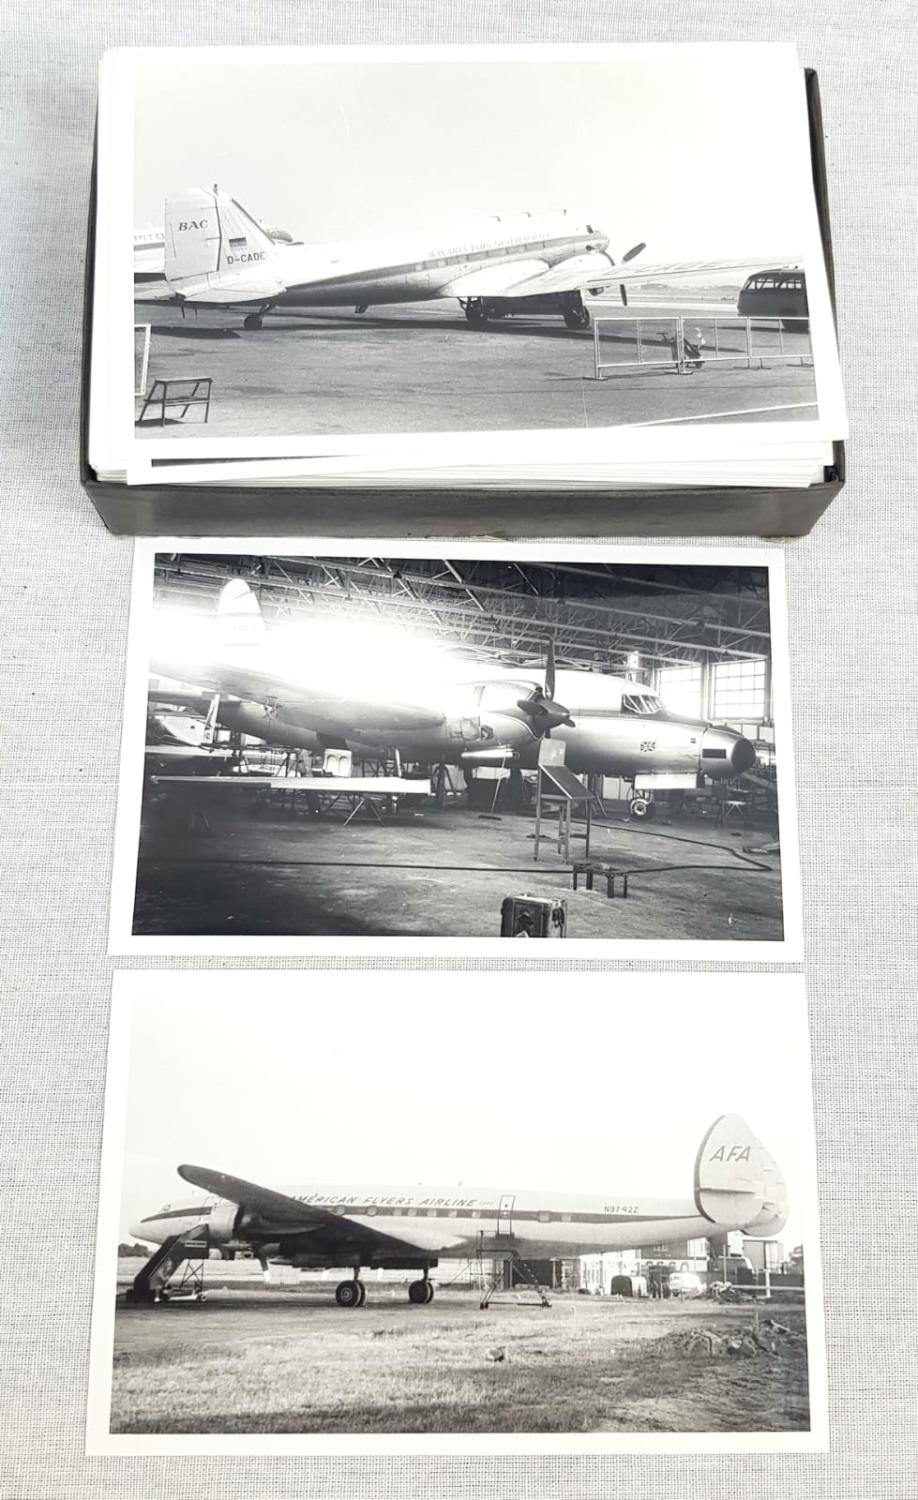 Over 400 Original Black and White Aircraft Photographs. Contains pictures taken from the 1960s to - Image 2 of 4